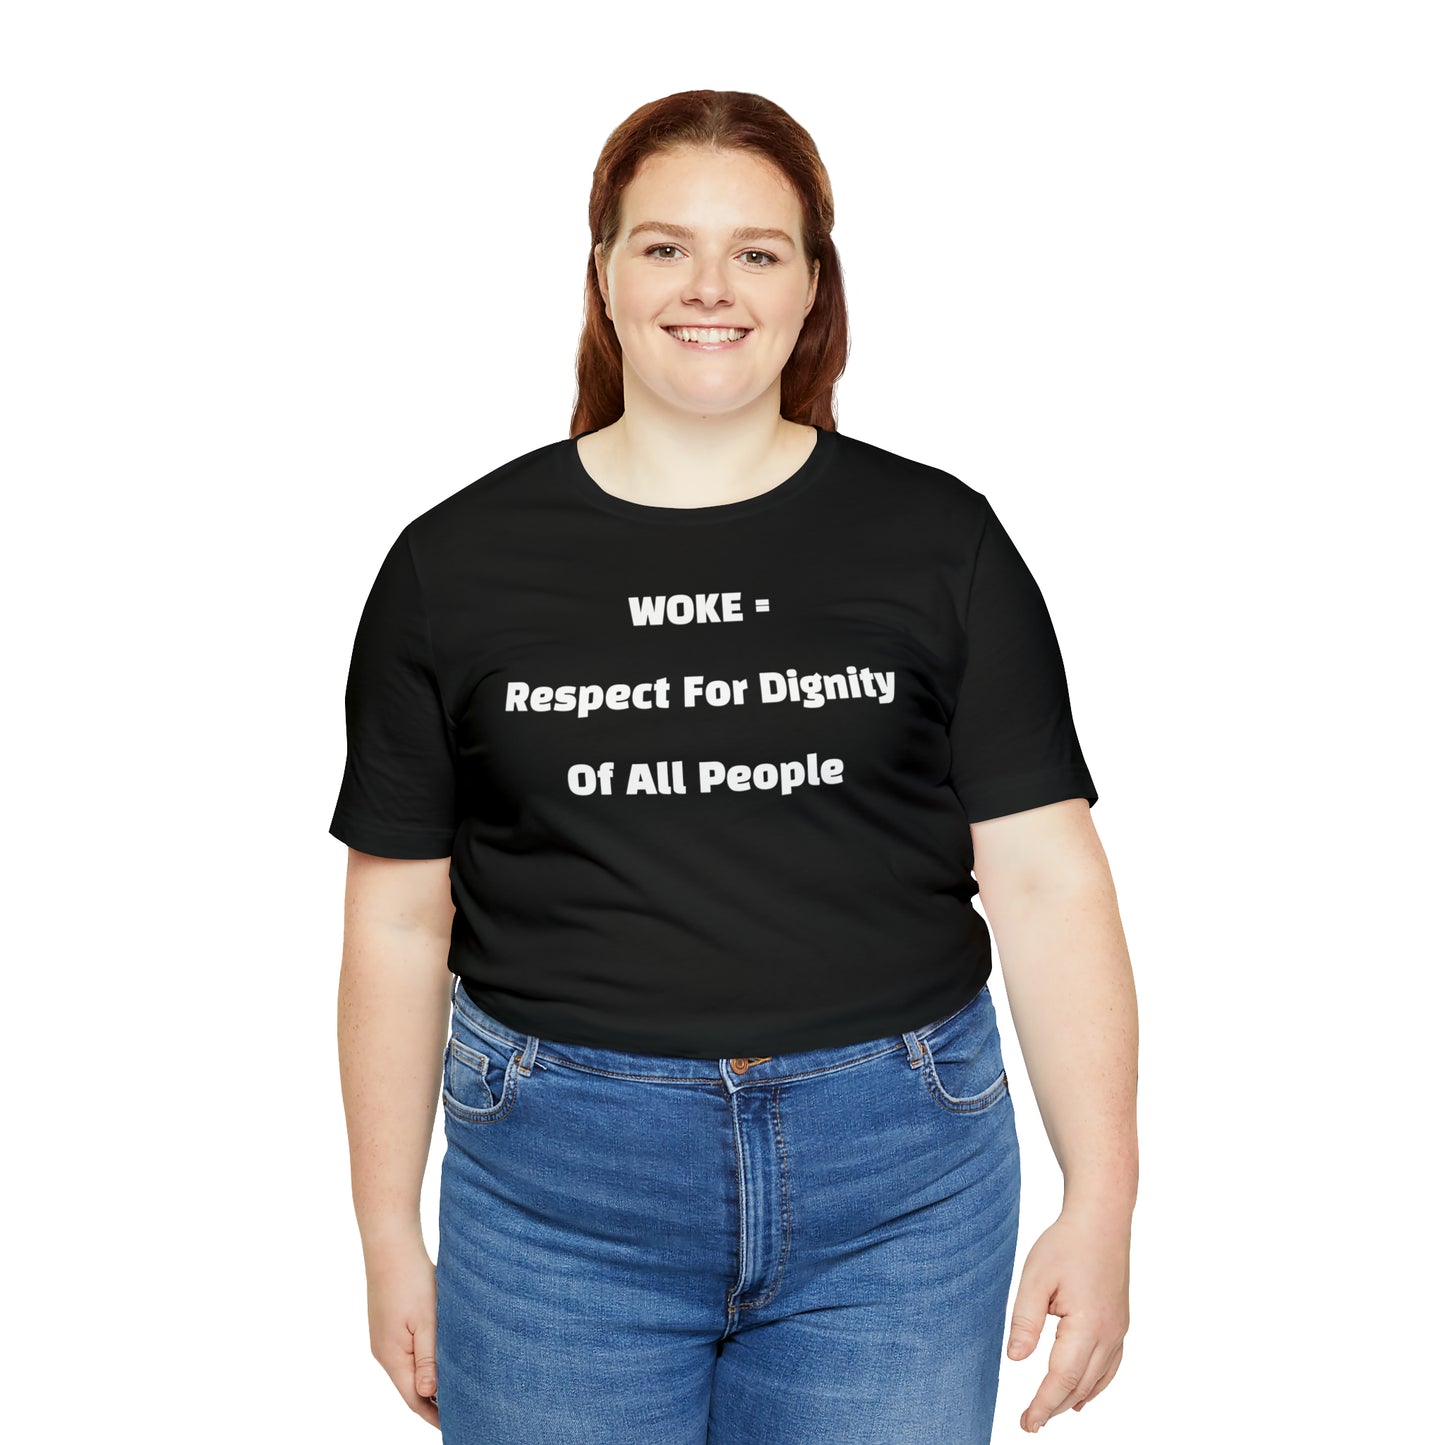 Woke = Respect and Dignity T-shirt